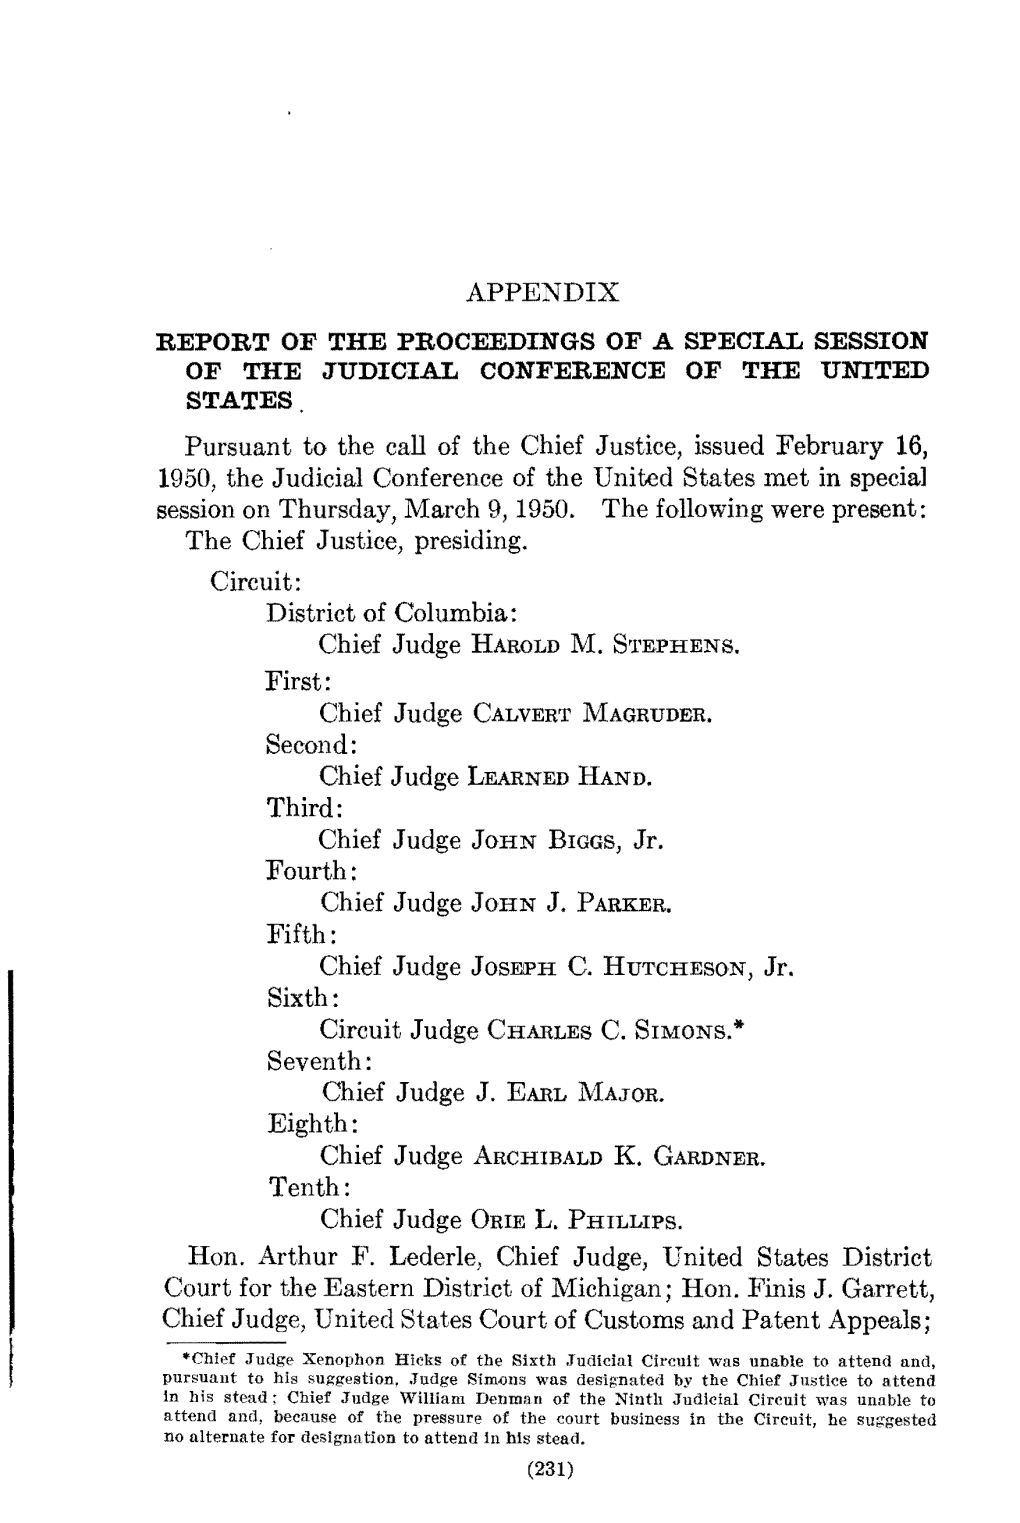 Pursuant to the Call of the Chief Justice, Issued February 16, 1950, the Judicial Conference of the United States Met in Special Session on Thursday, March 9,1950